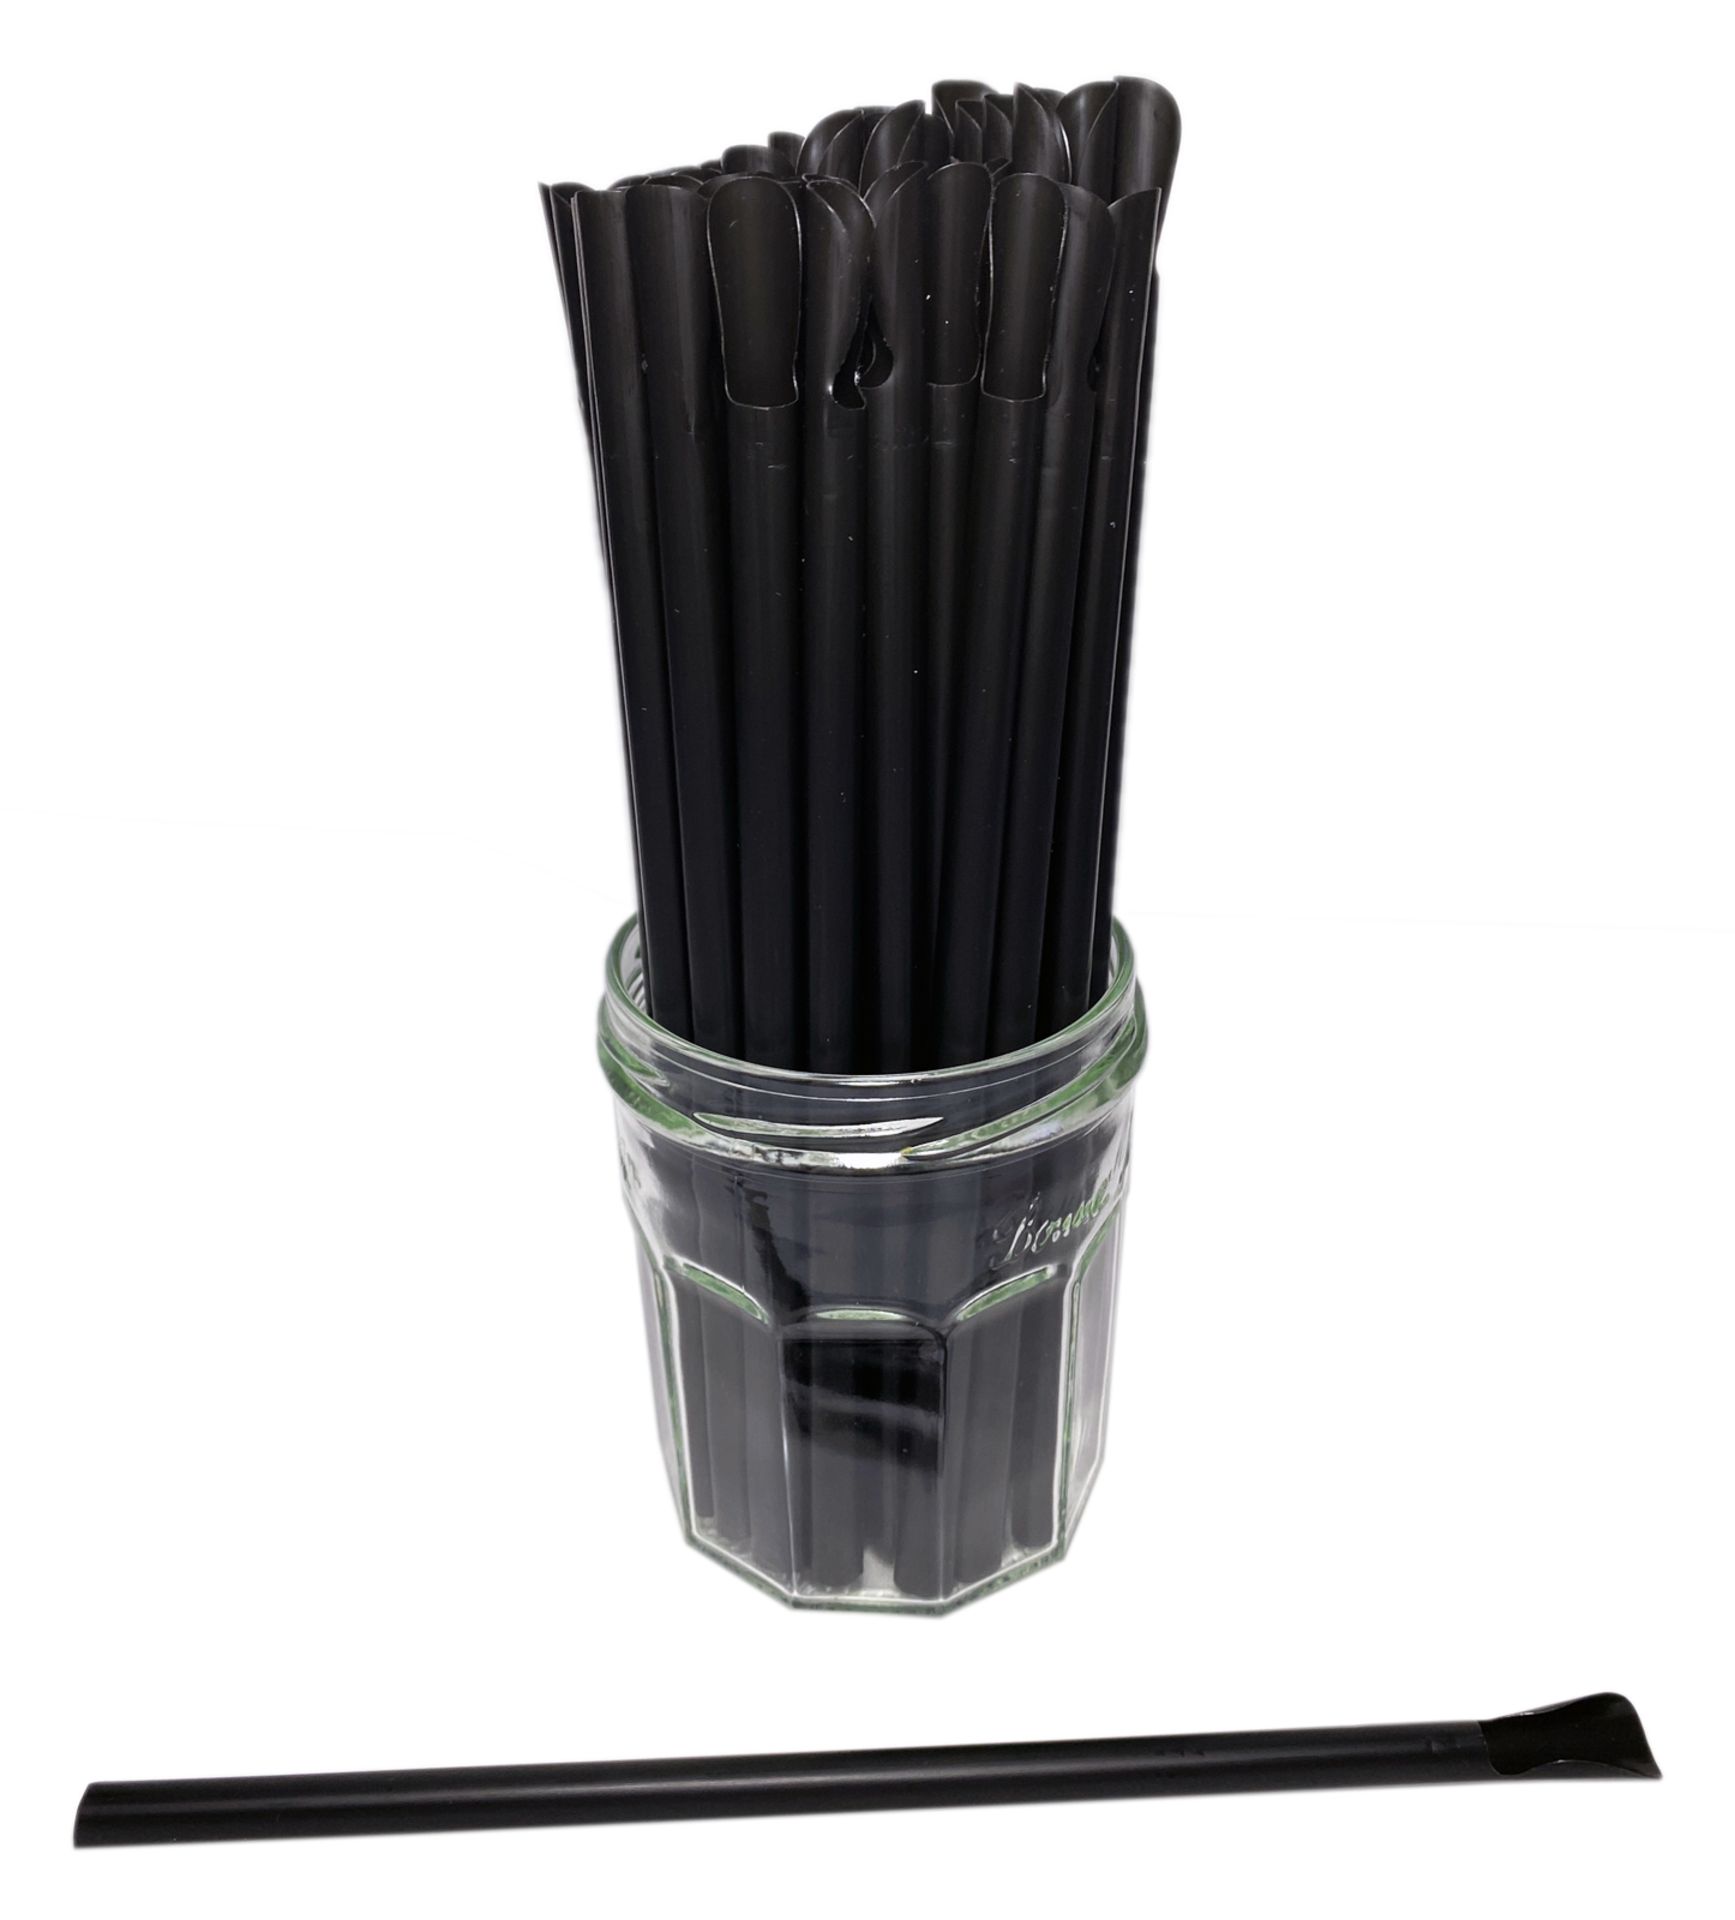 5 x Boxes of Black Spoon Straws by 888 Gastro Disposables - Image 3 of 3